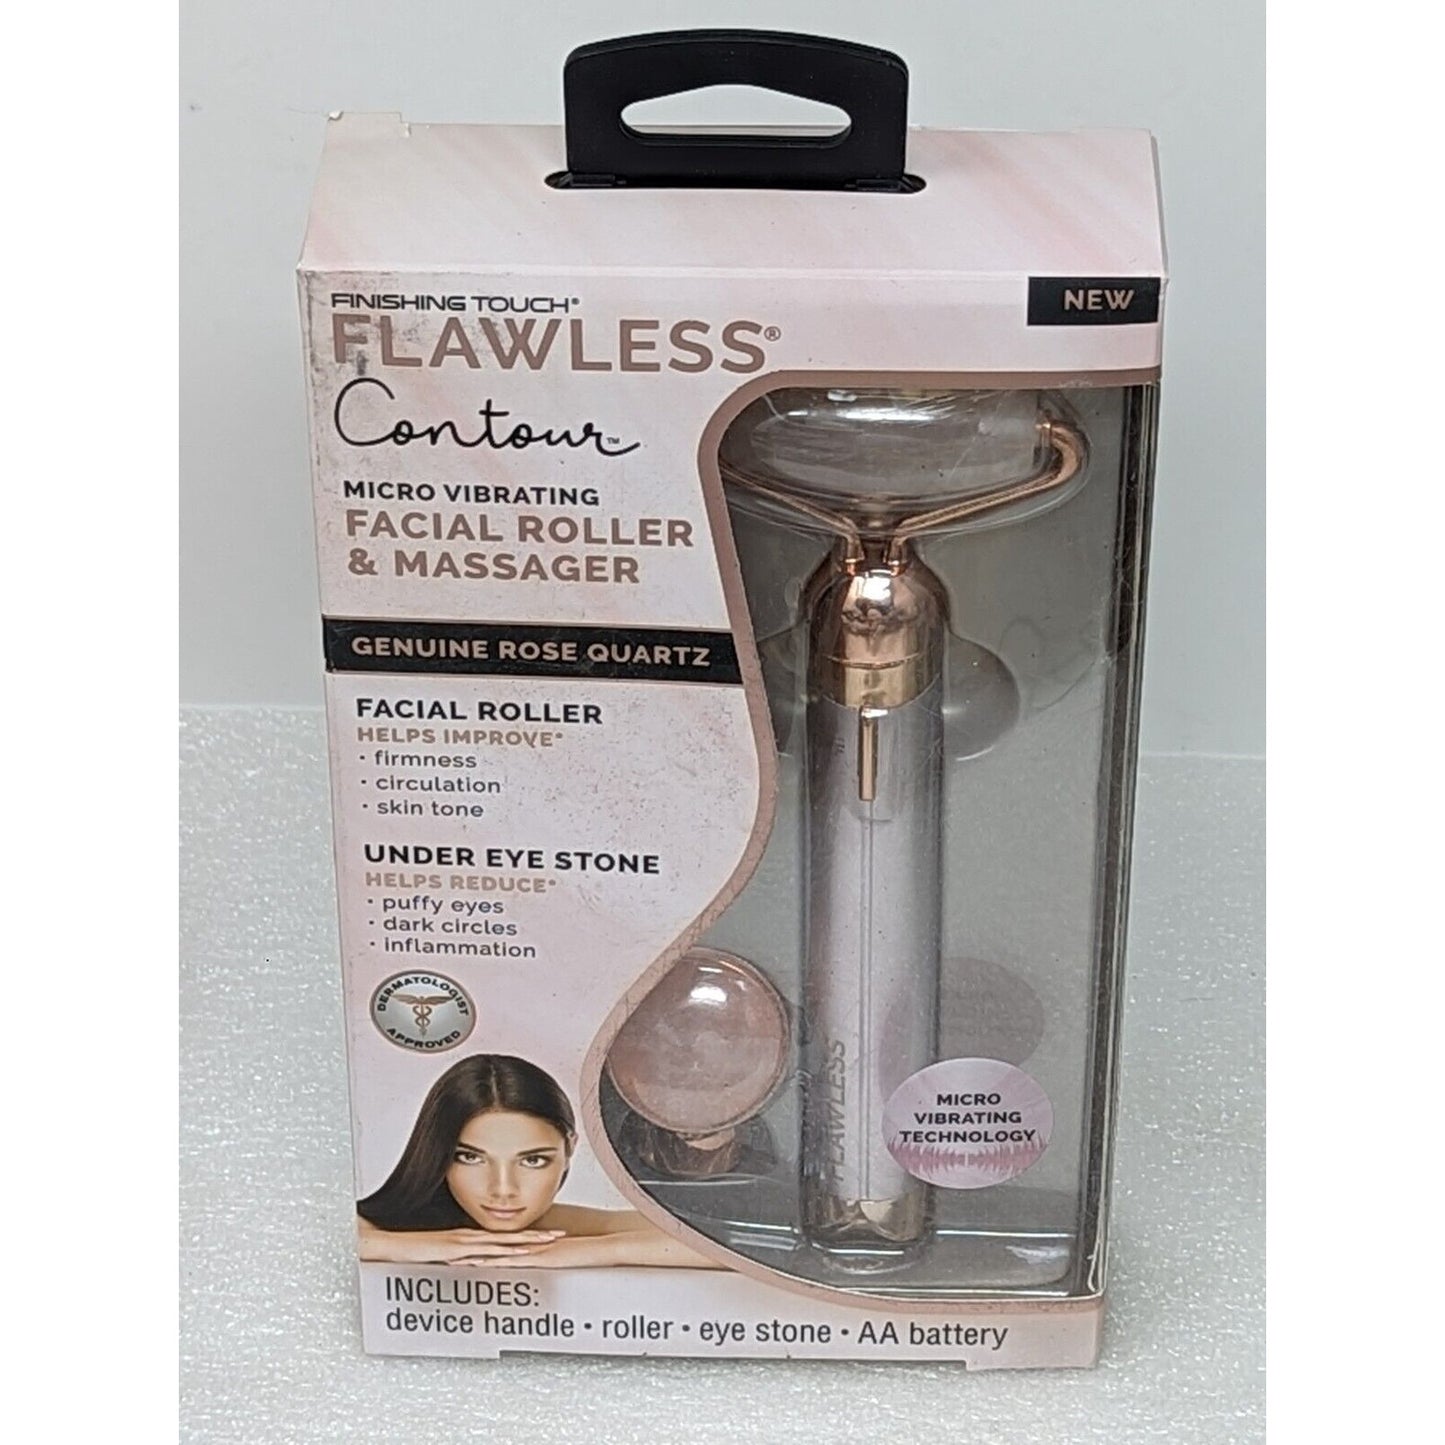 Finishing Touch Flawless Contour Vibrating Facial Roller & Massager Rose Quartz